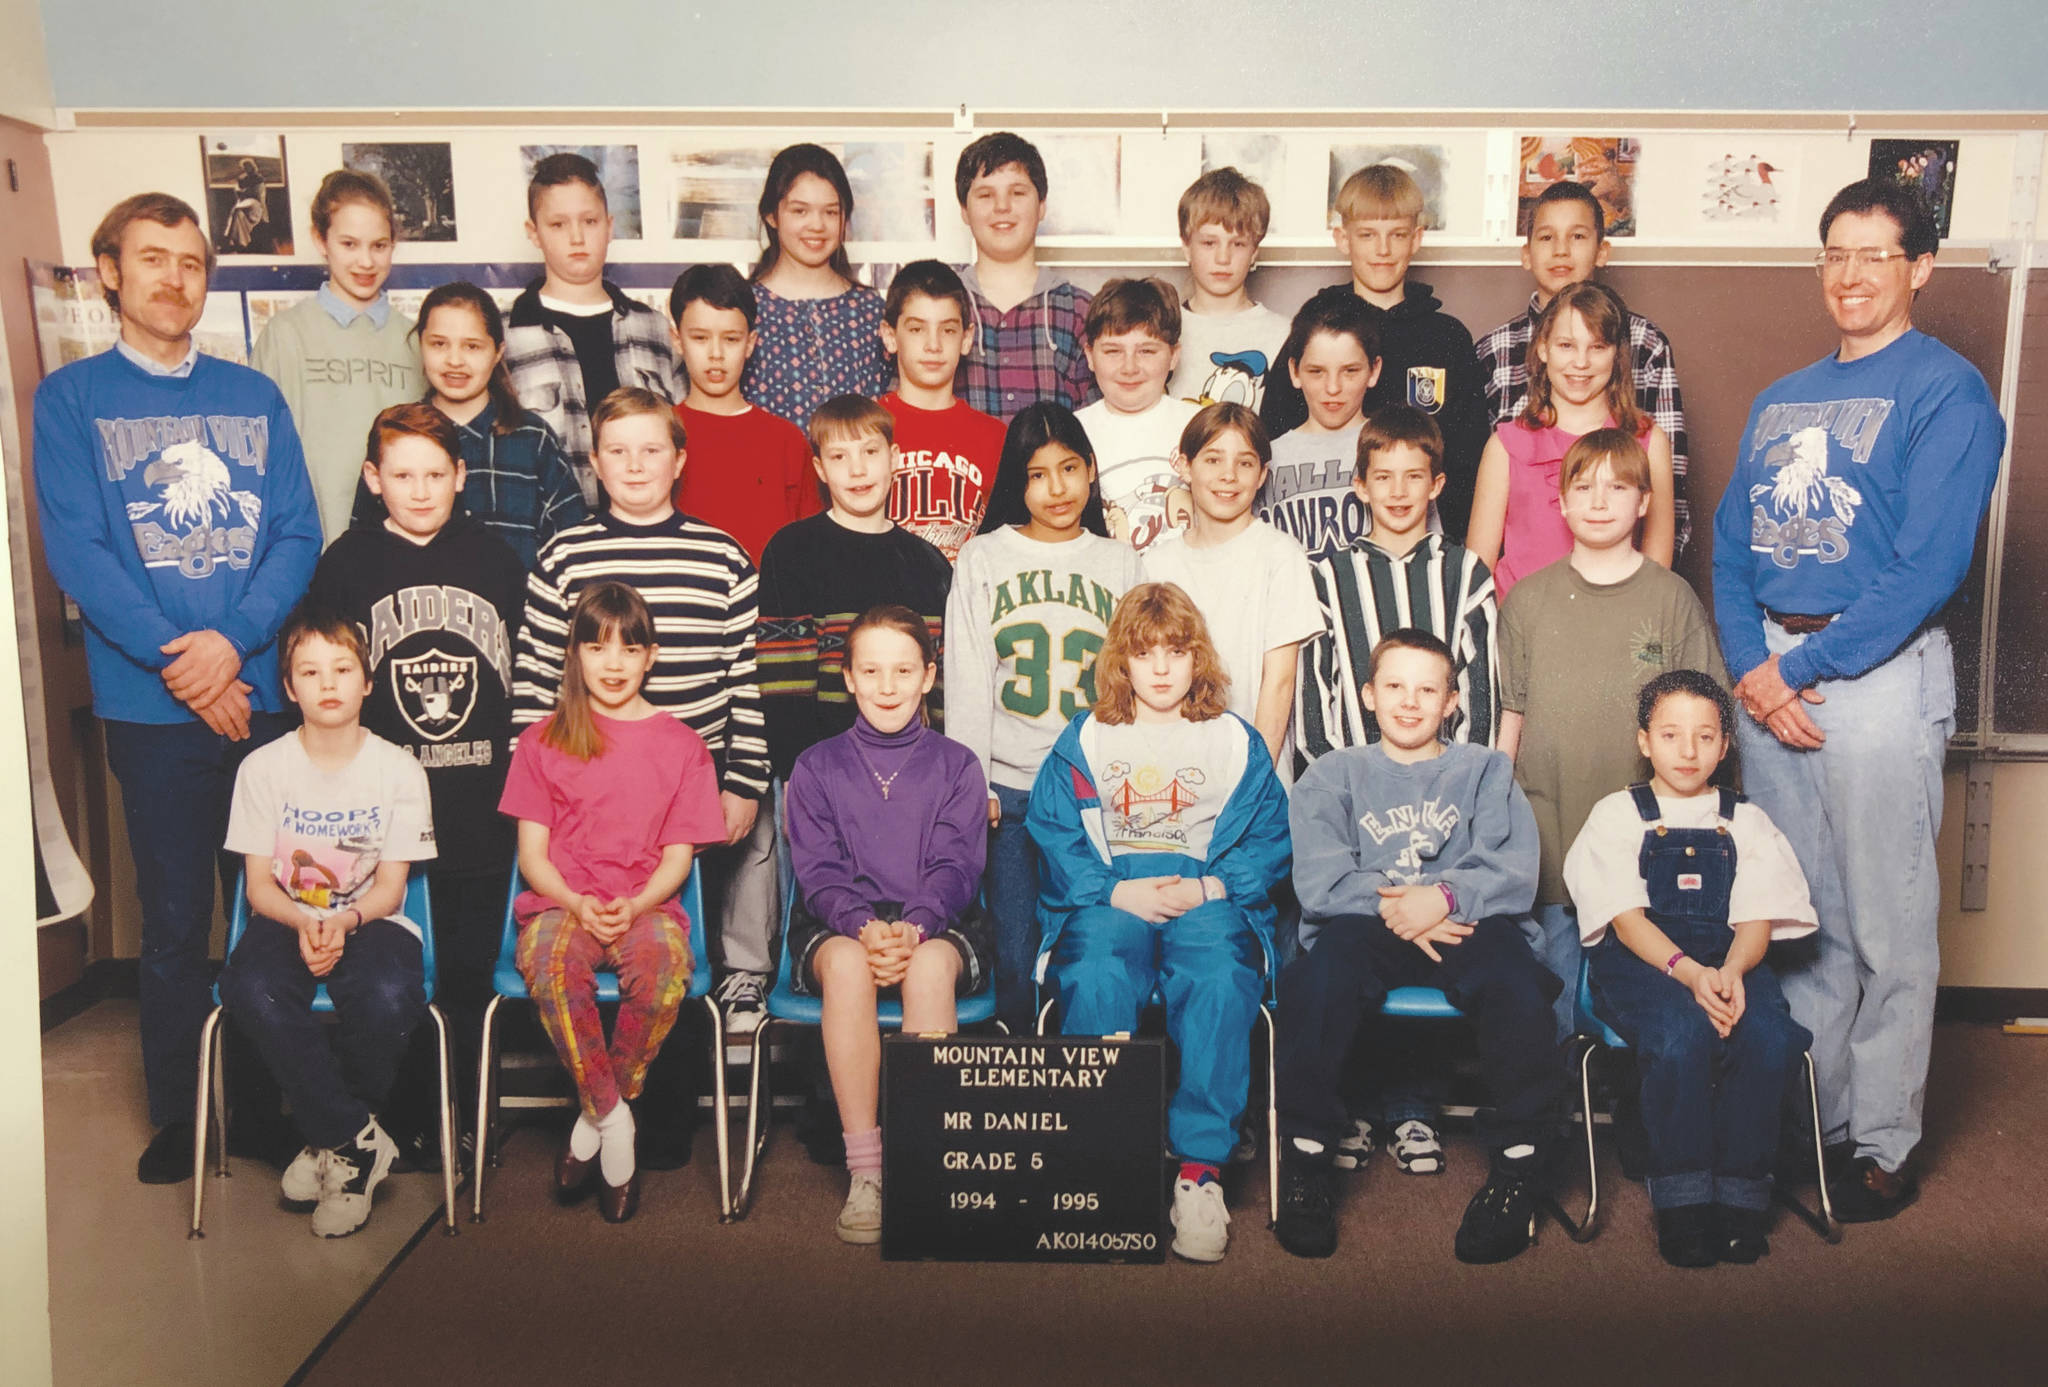 A yearbook photo of David Daniel’s fifth grade Mountain View Elementary class from the 1994-95 school year. Daniel is on the far right. Belinda Espy, now Smith, is in the bottom row on the far right. Smith now teaches second grade at Mountain View. Daniel is retiring after 34 years with the Kenai Peninsula Borough School District. (Photo provided by Karl Kircher)